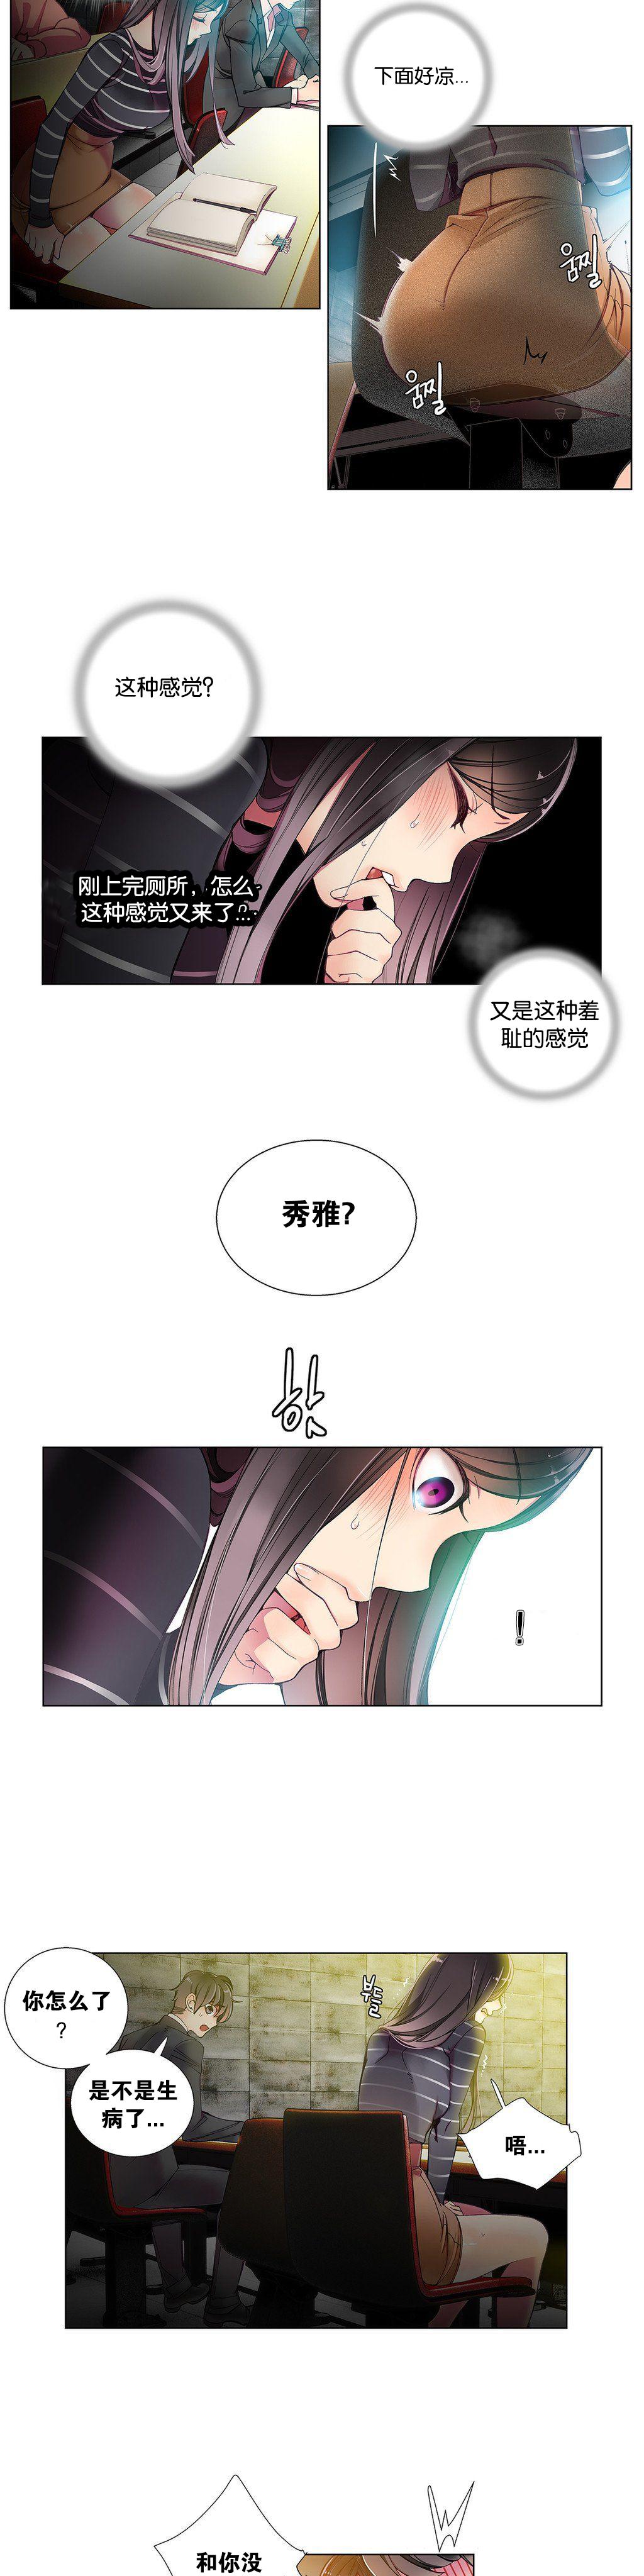 [Juder] 莉莉丝的纽带(Lilith`s Cord) Ch.1-15 [Chinese] 116